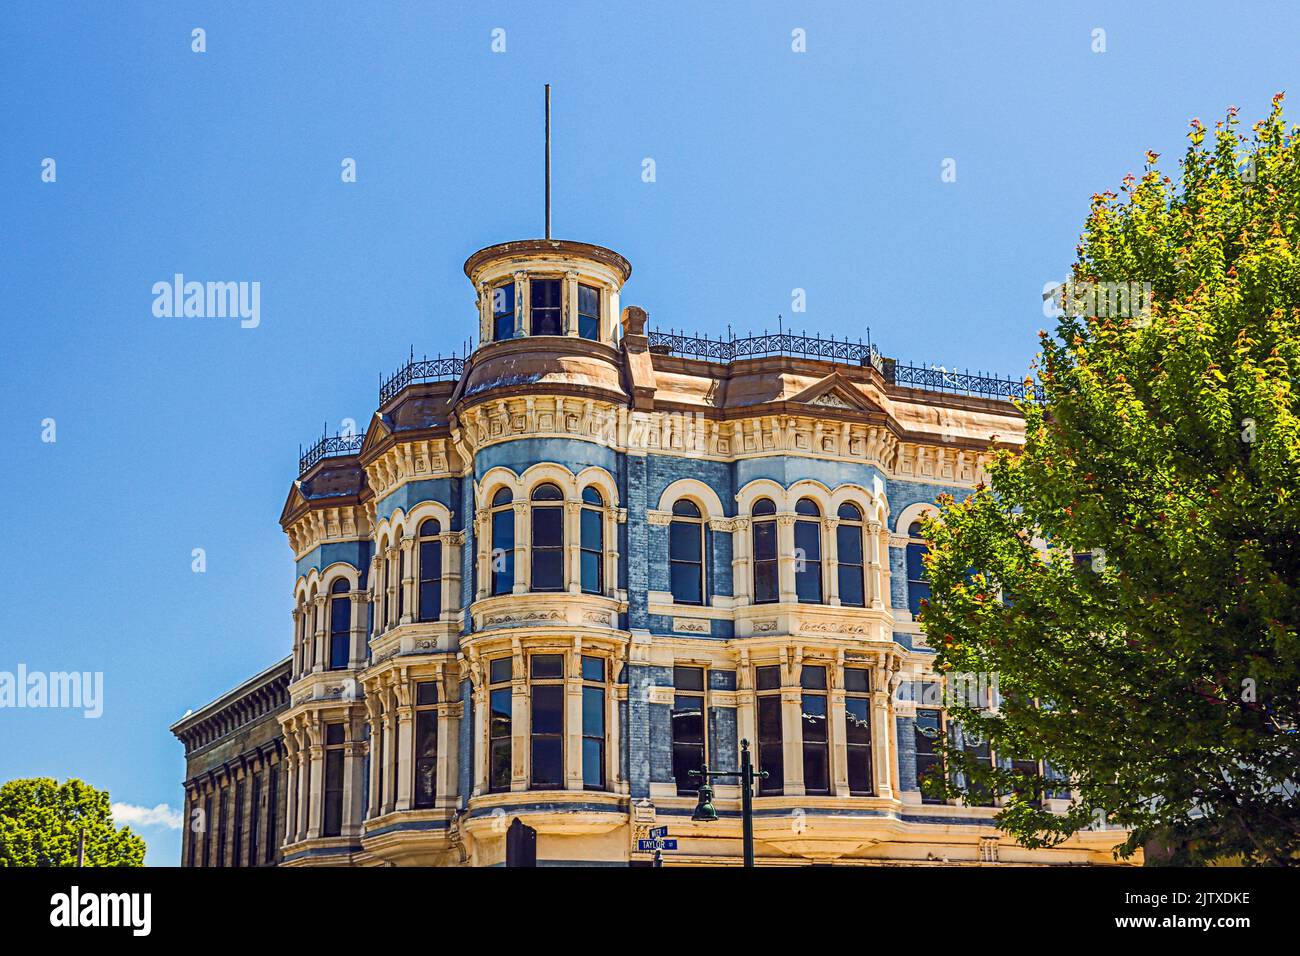 The Hastings Buildings in the historic downtown district of Port Townsend, Washington. A three-story Victorian structure built in 1889. Stock Photo